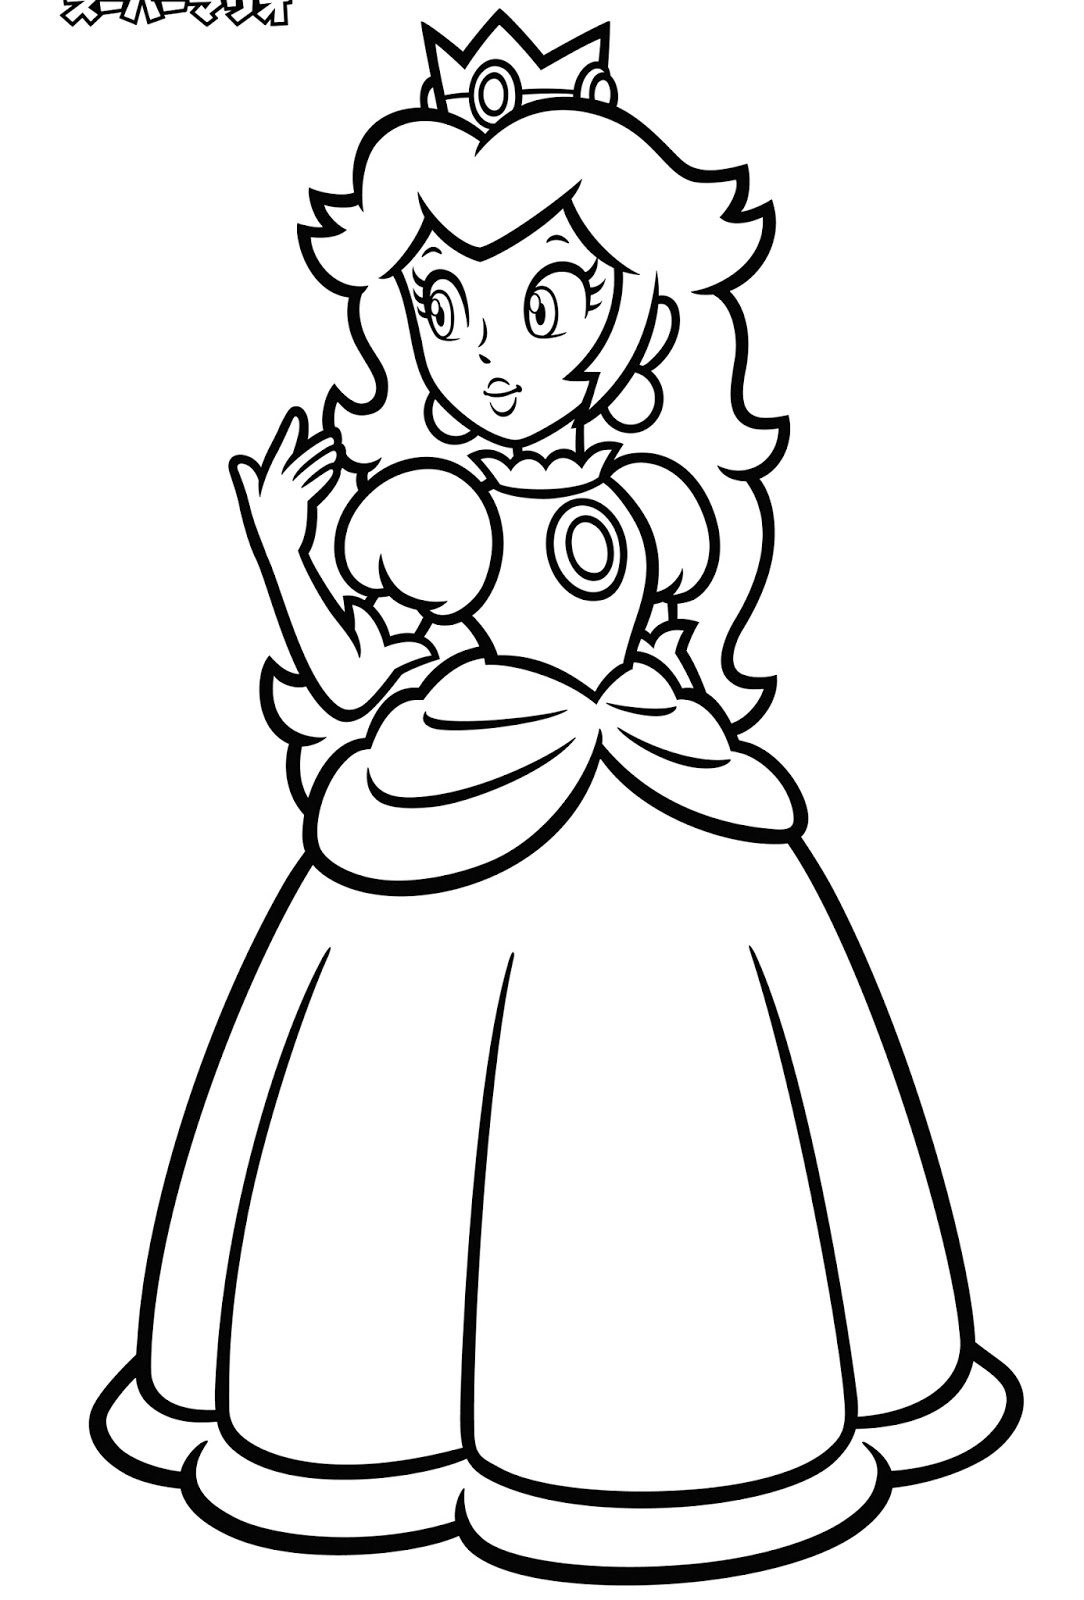 Nintendo Launches Coloring Pages Characters Mario Startlr